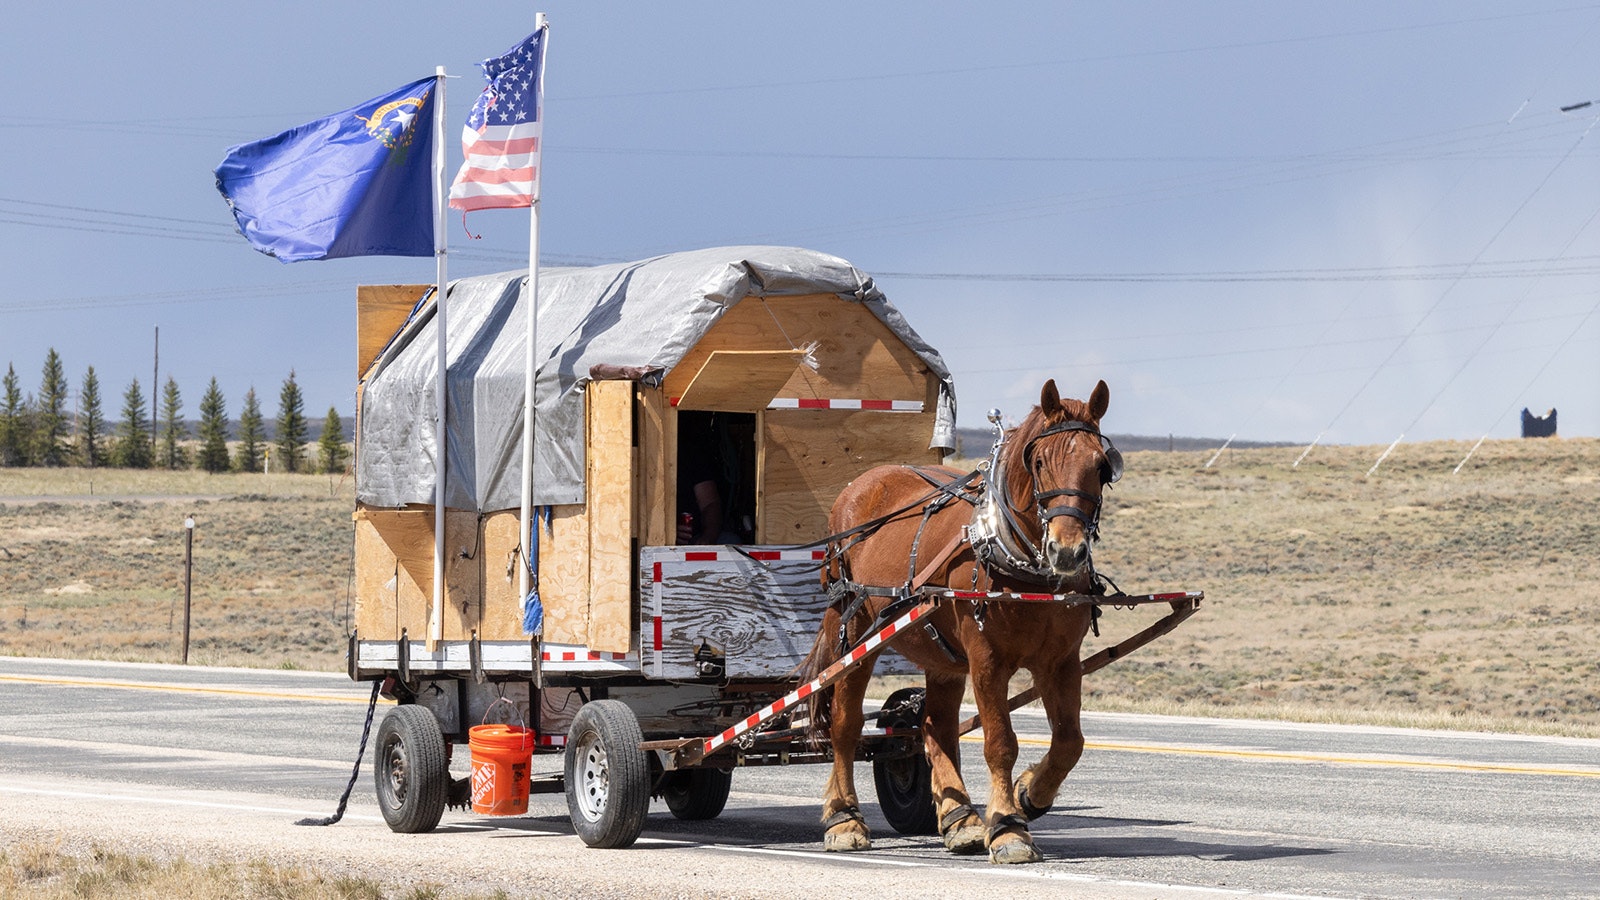 A man known as Lee The Horselogger was in Wyoming this week on a cross-country journey by horse-drawn wagon with an ultimate destination of Boston. He explained to Cowboy State Daily that he likes huge draft horses better than “little horses.”